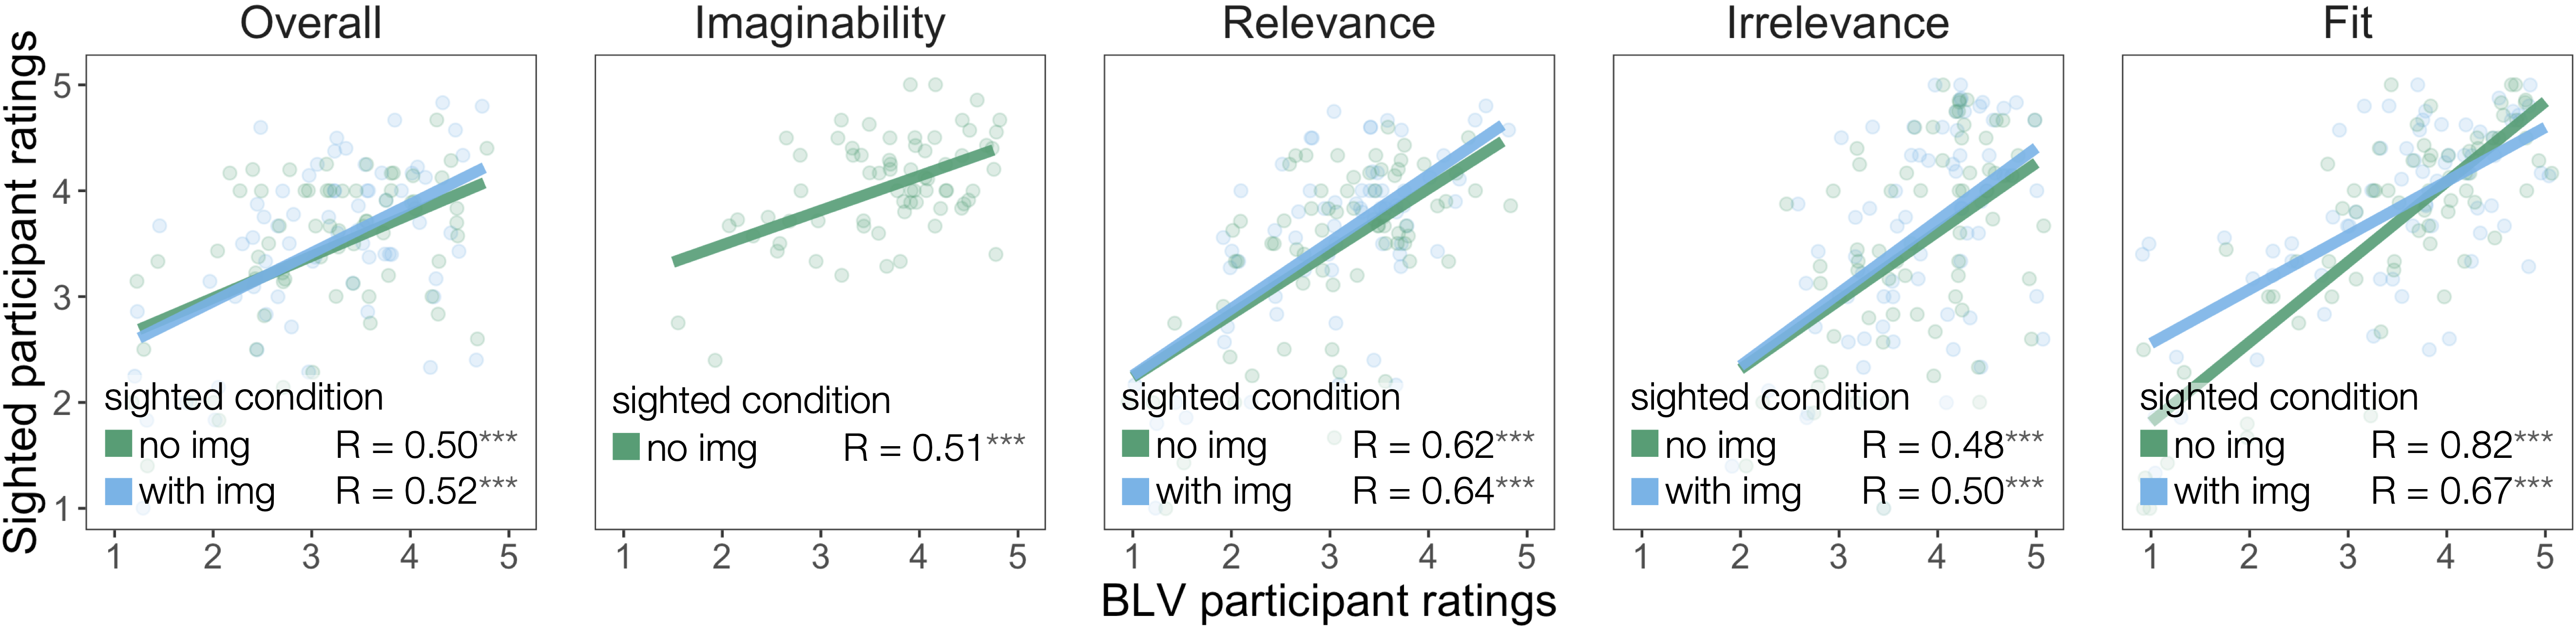 Correlations between sighted and BLV participant judgments for all five evaluation questions: Overall, Imaginability, Relevance, Irrelevance, and Fit. All correlations are statistically significant. For the Overall, Relevance, and Irrelevance questions, correlations are consistently 2% smaller in the condition where sighted participants can see the image compared to when they can't. Correlations are at about 0.5 for the questions Overall, Imaginability, and Irrelevance, and above 0.6 for the Relevance question. The highest correlation is 0.82 for how well the image fits the article, judged by sighted participants before the image was visible to them. After the image was revealed, correlation drops to 0.67. 